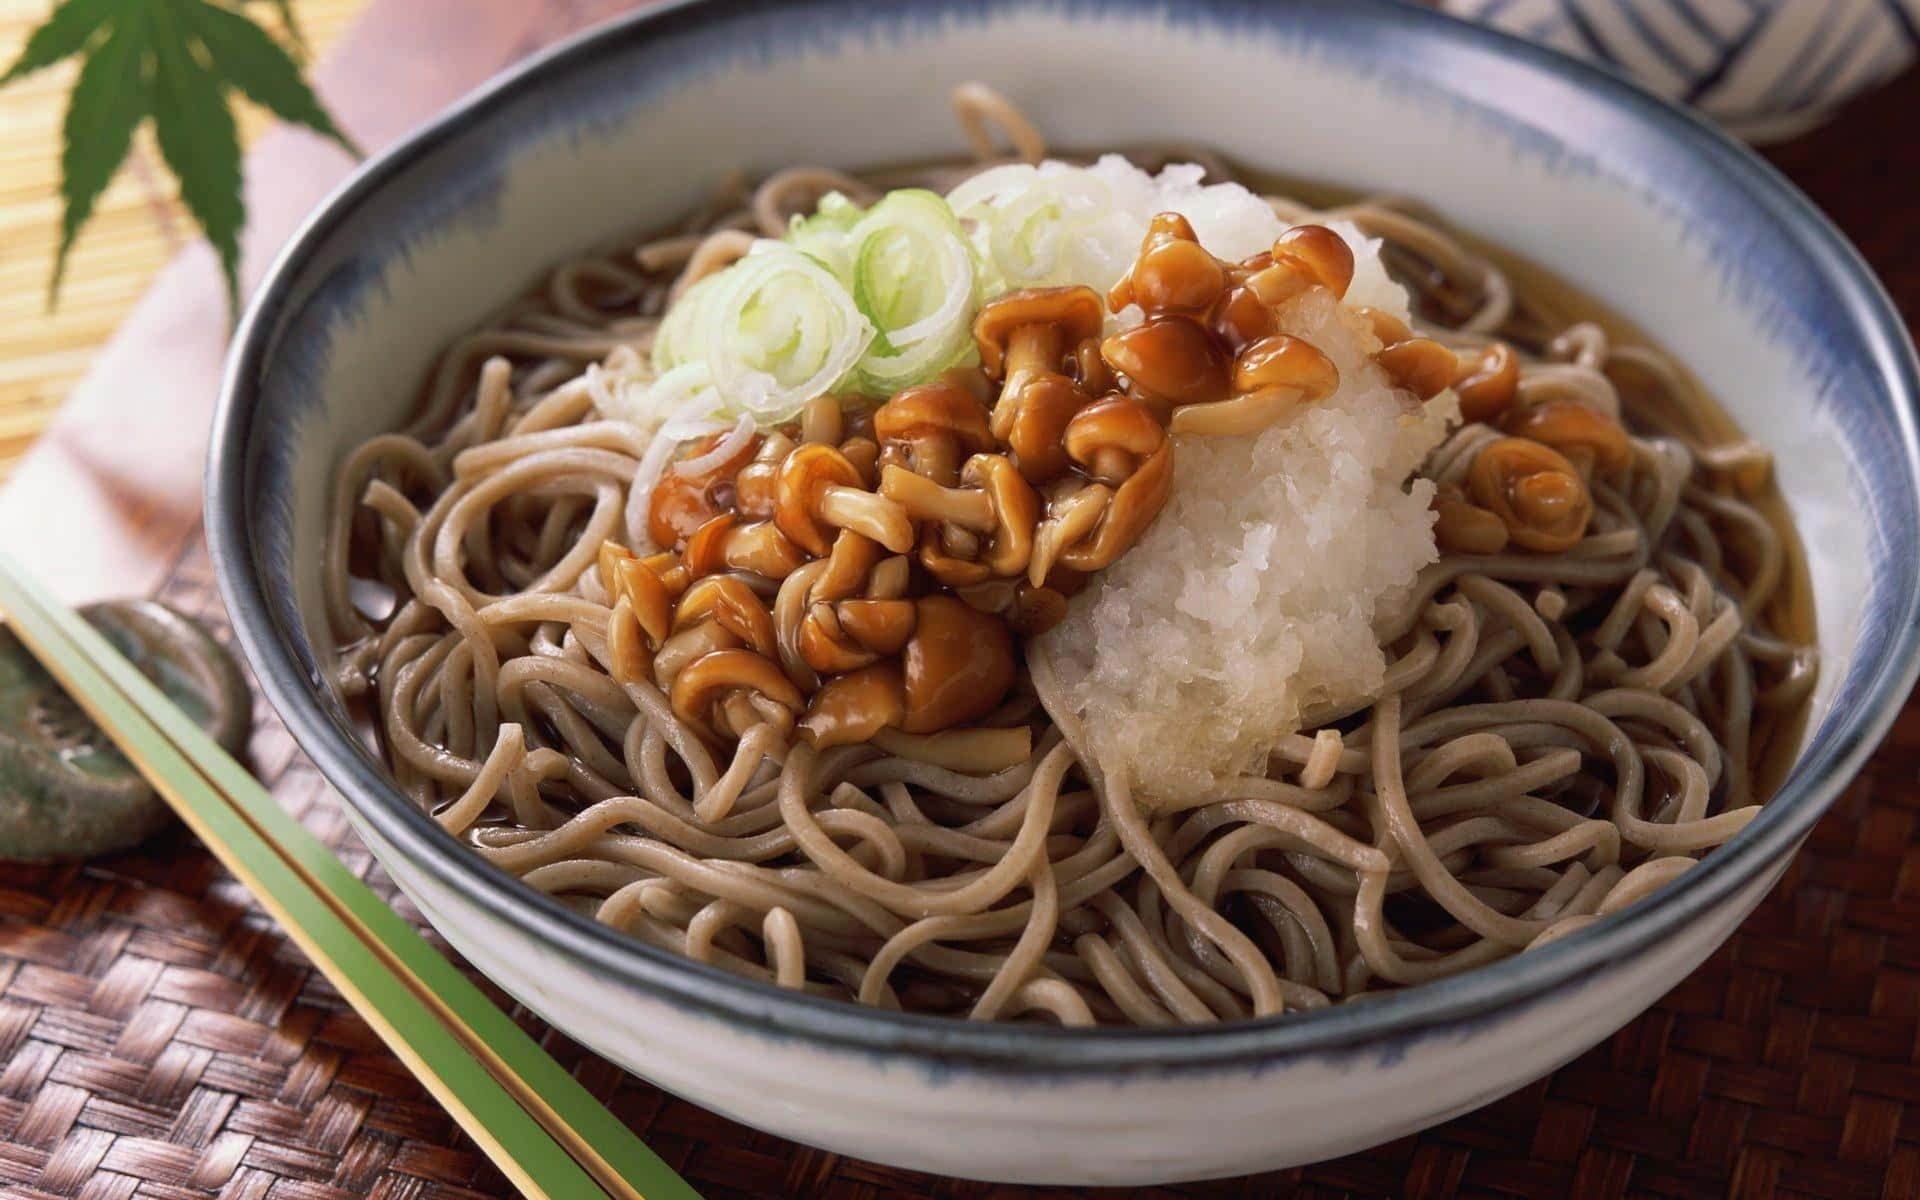 A Bowl Of Noodles With Peanuts And A Leaf